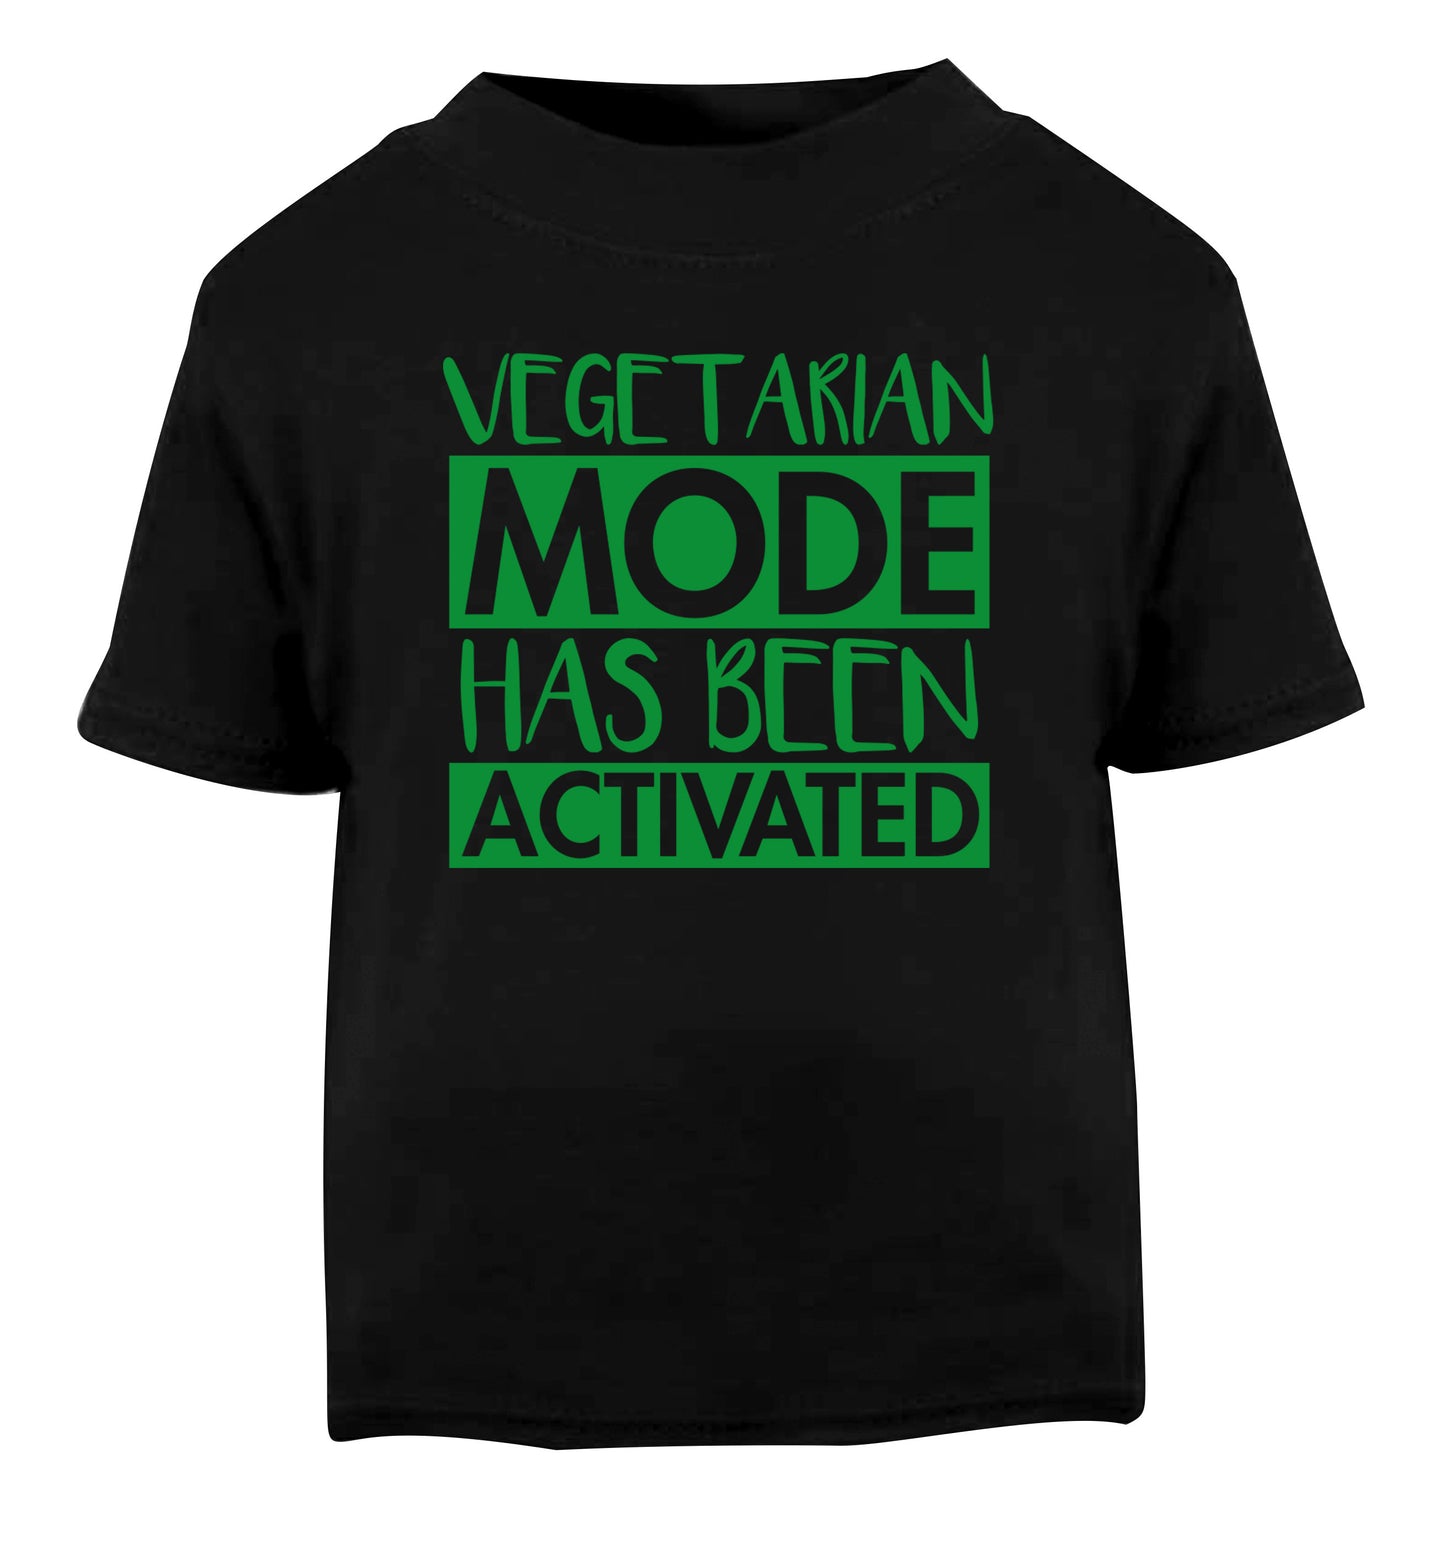 Vegetarian mode activated Black Baby Toddler Tshirt 2 years